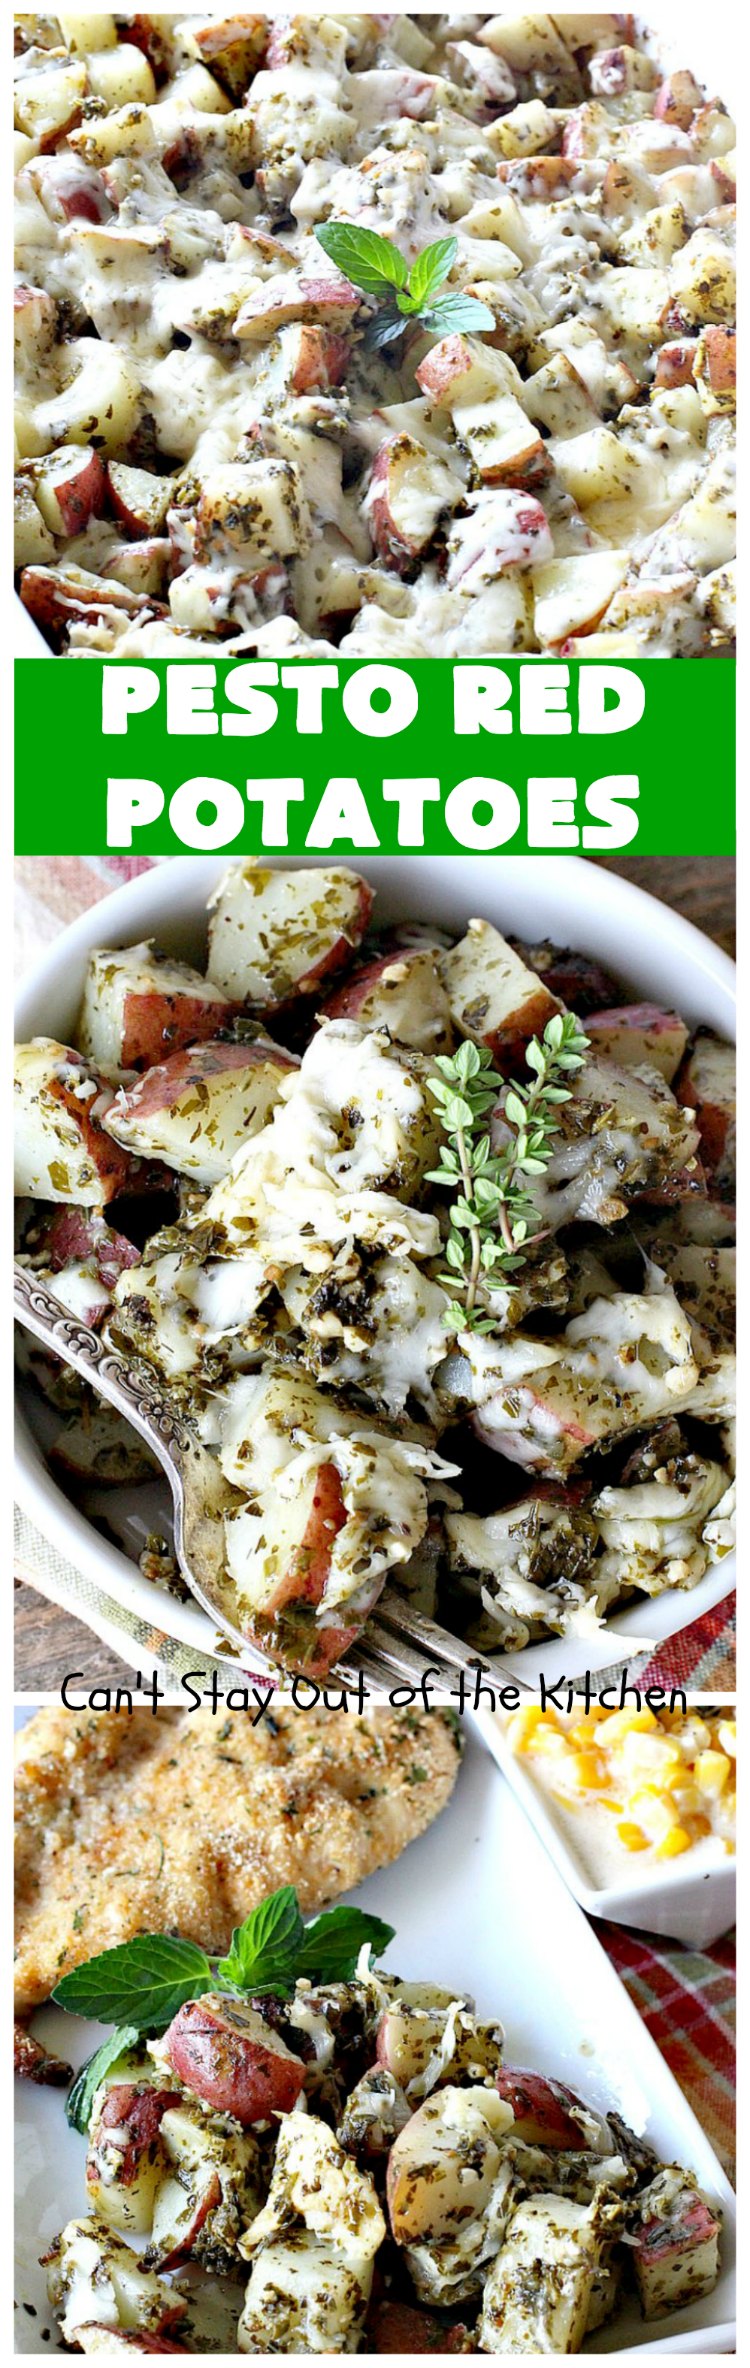 Pesto Red Potatoes | Can't Stay Out of the Kitchen